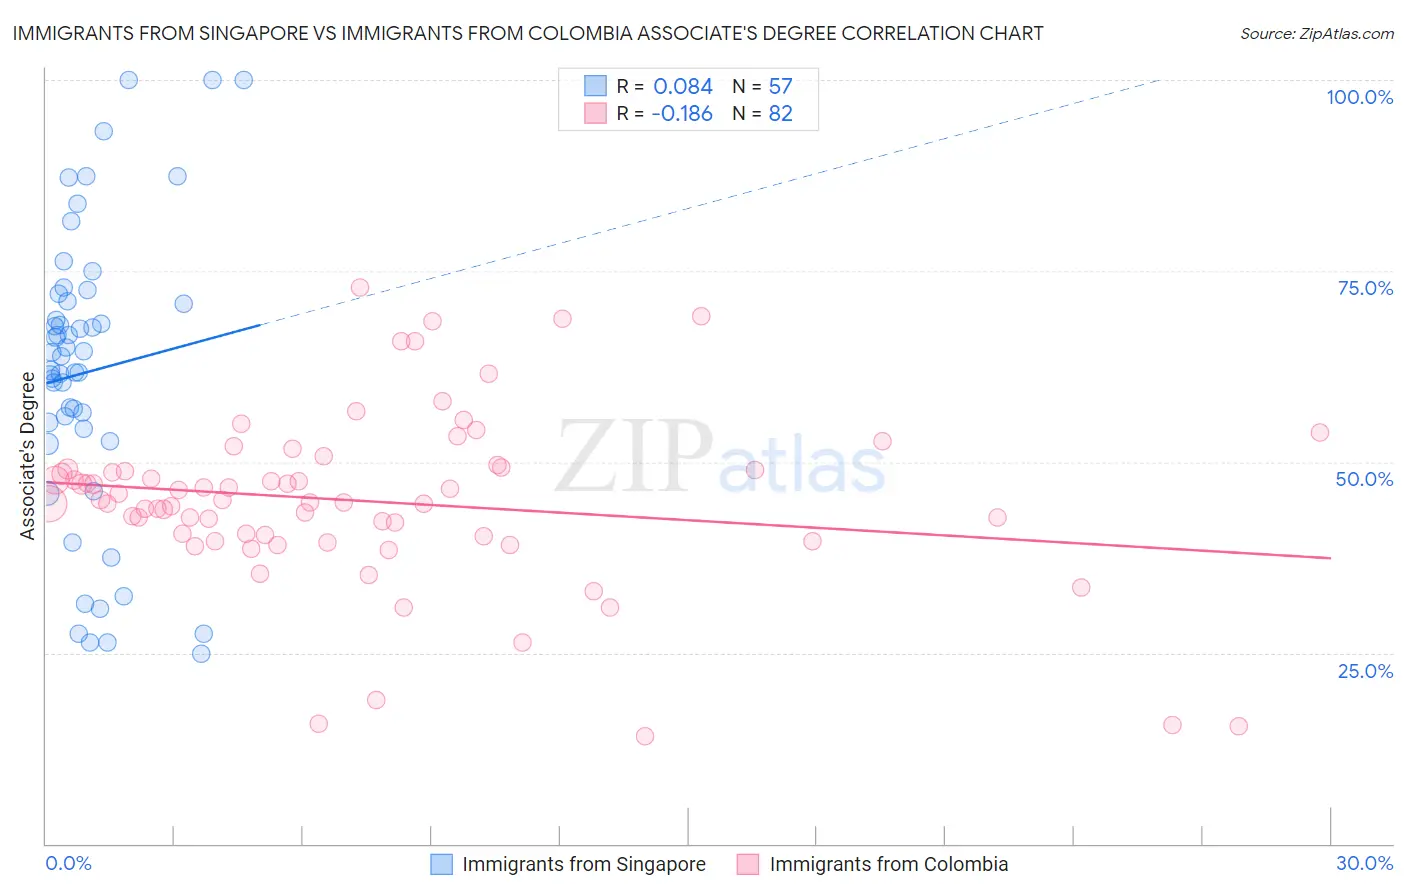 Immigrants from Singapore vs Immigrants from Colombia Associate's Degree